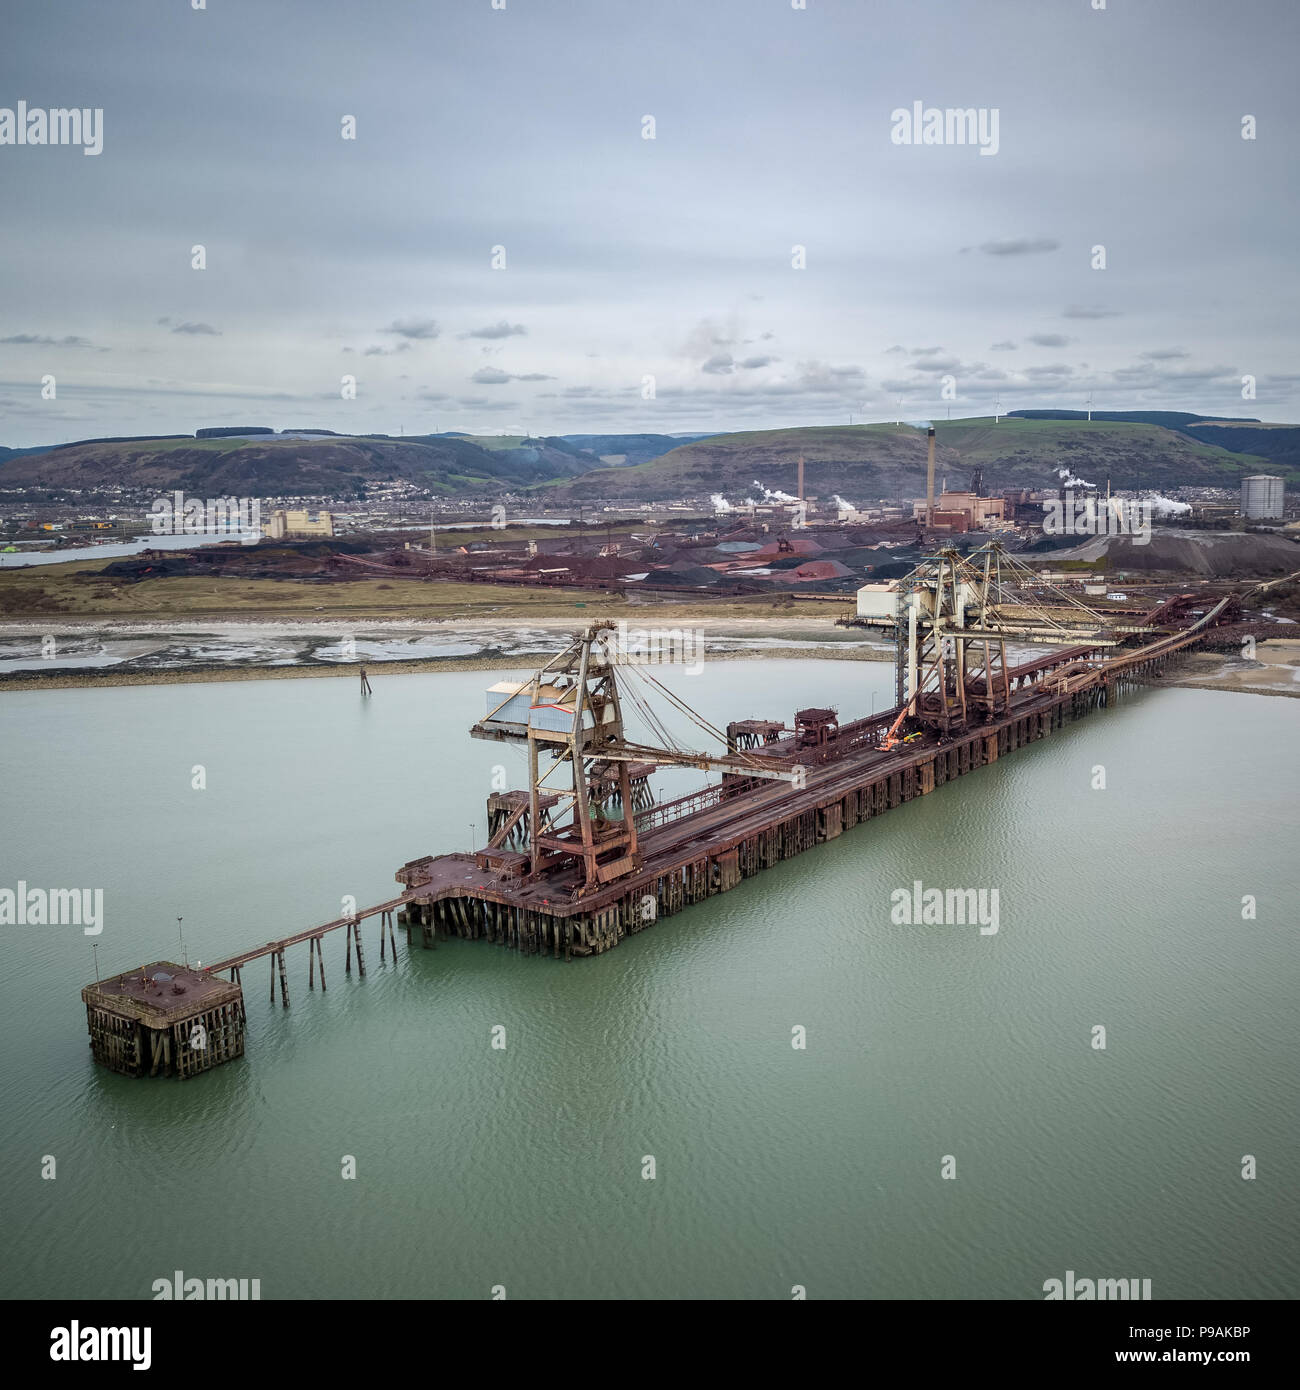 Photograph of the loading cranes on the deep water jetty at Port Talbot Steel Works in South Wales taken via Drone Stock Photo